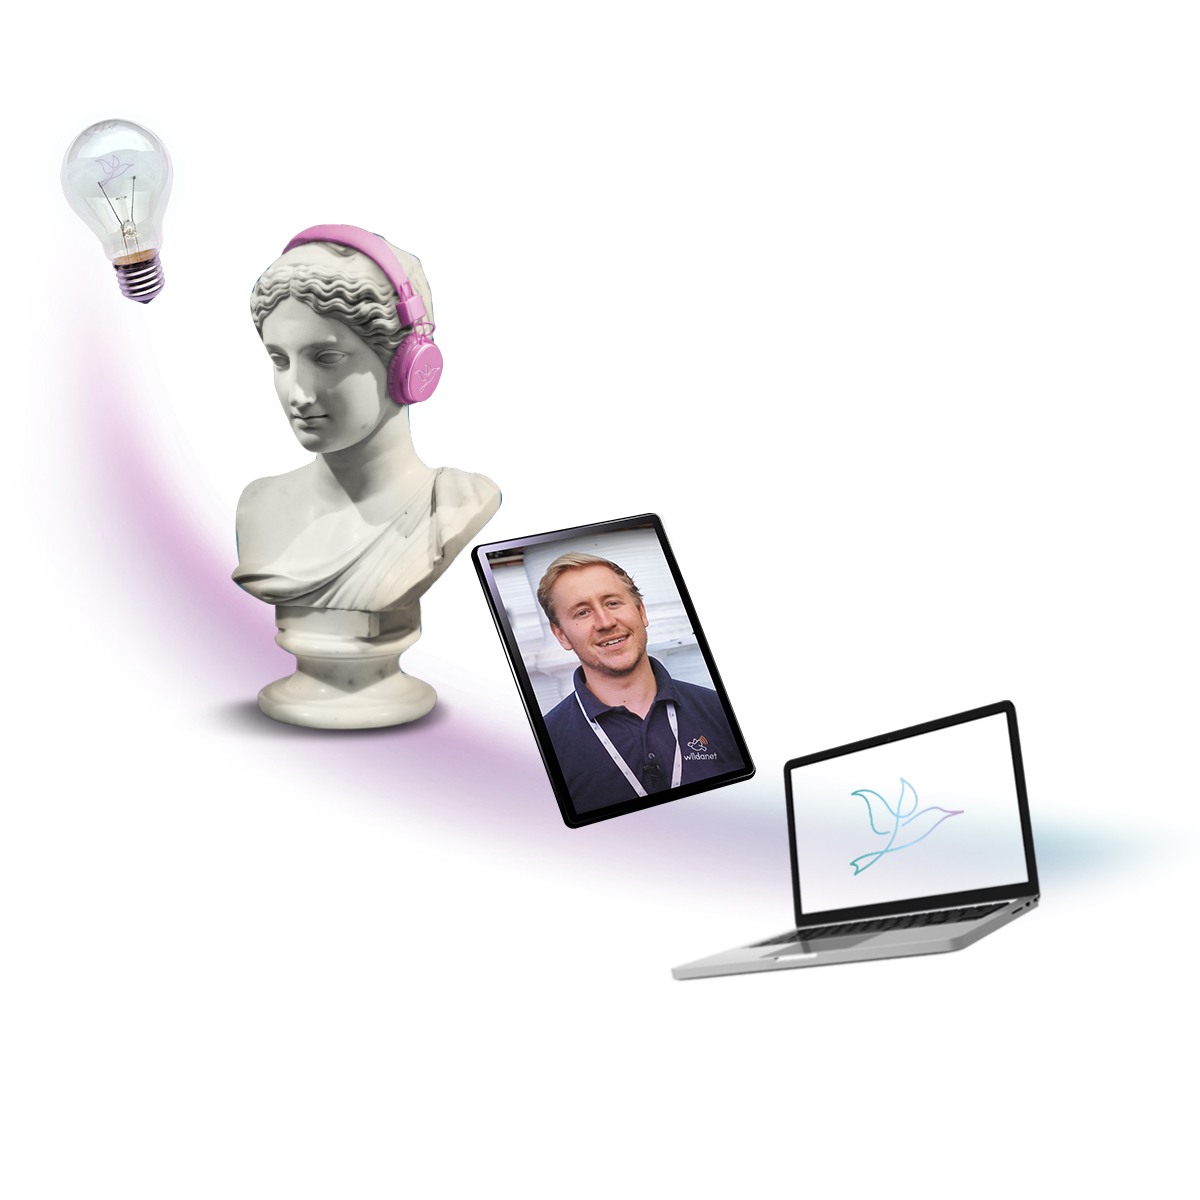 Image of laptop and tablet device by a bust wearing headphones